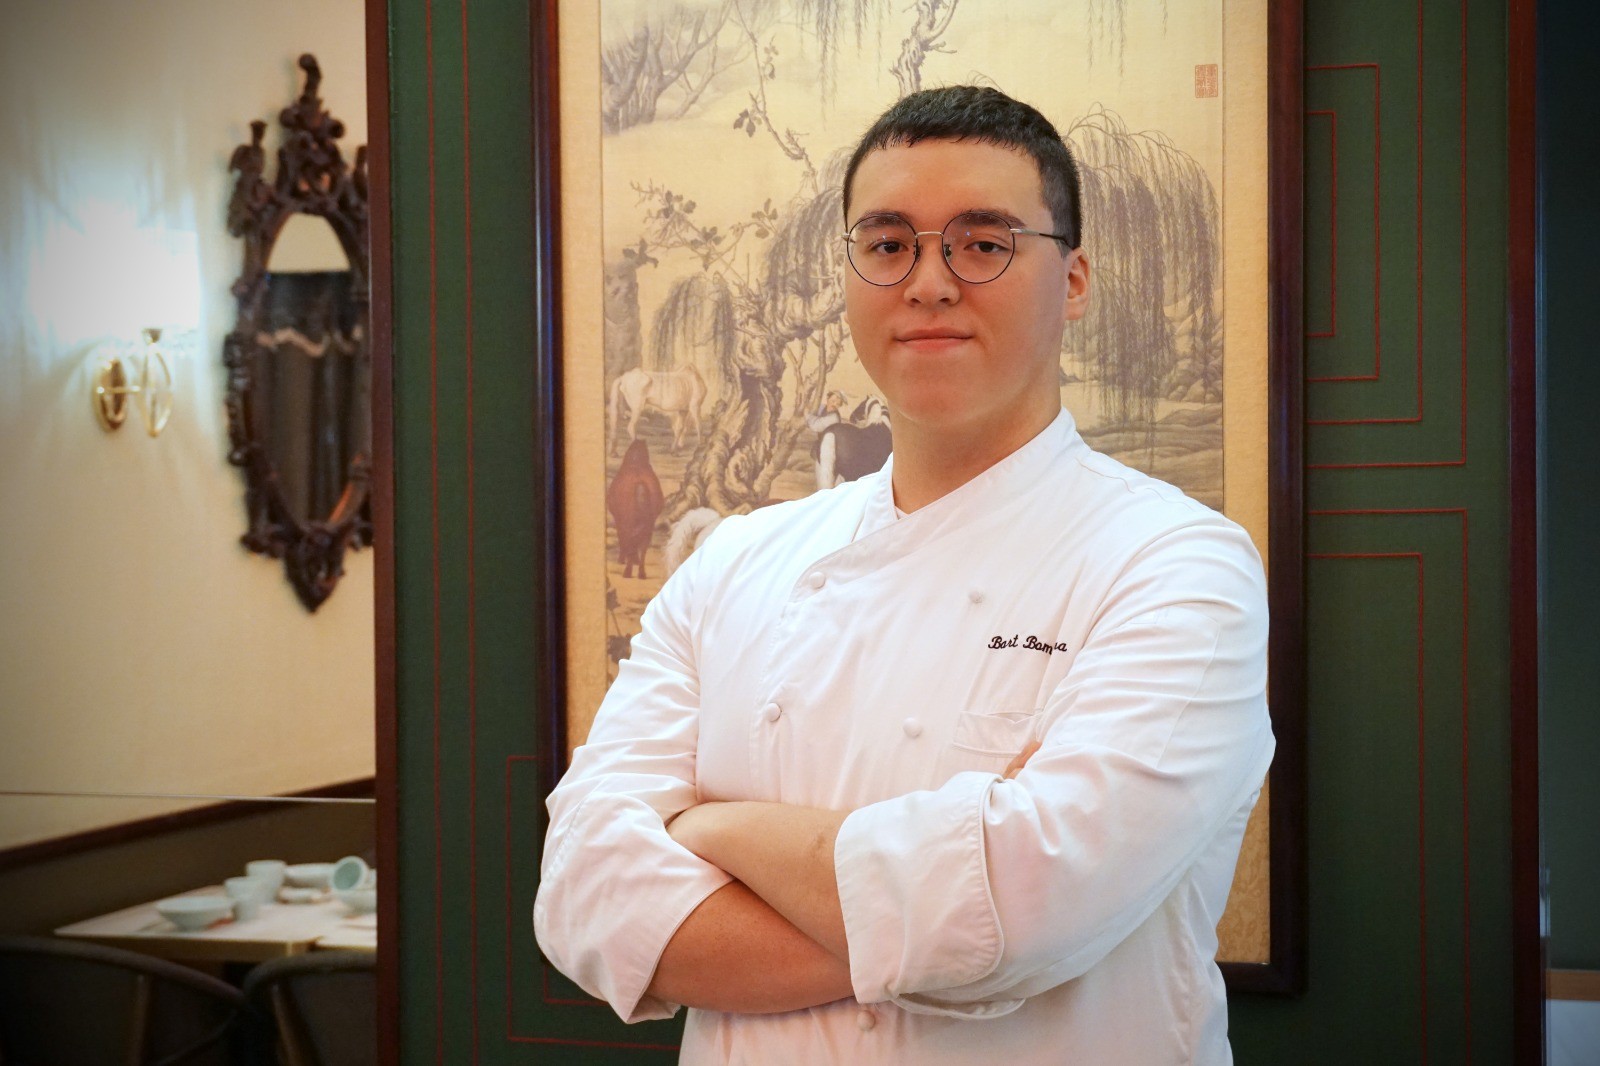 Bart Bombana, the 18-year-old son of acclaimed three-Michelin star chef Umberto, has become an apprentice dim-sum chef at Nove to learn Chinese cuisine from the masters.